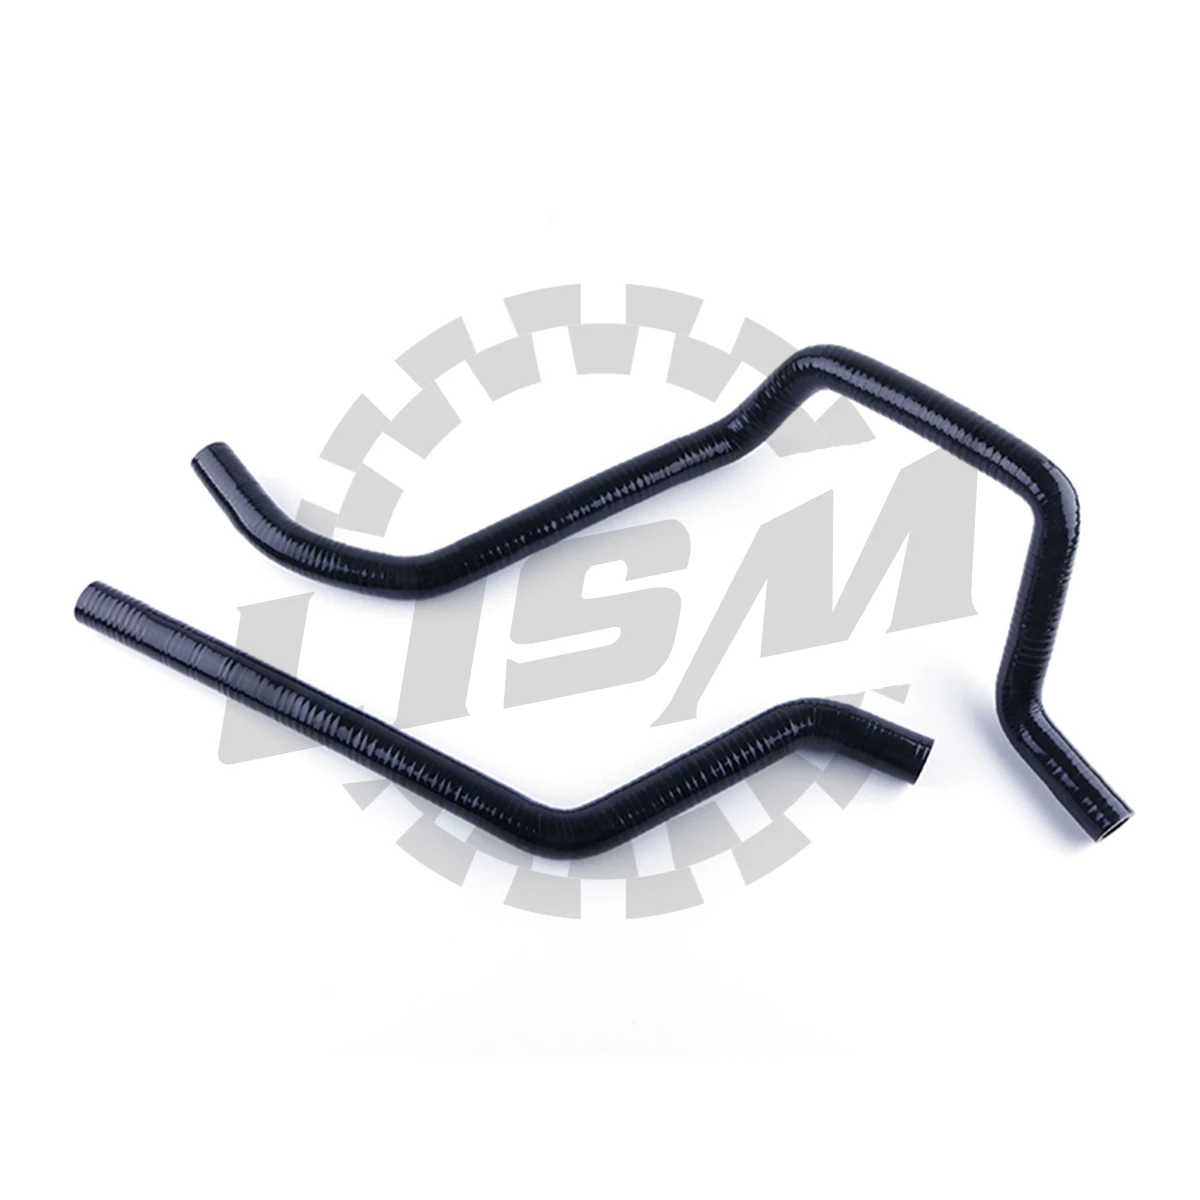 For 2002-2008 Yamaha Grizzly 660 YFM660 4x4 2003 2004 2005 2006 2007 ATV Silicone Radiator Coolant Hose Kit Upper and Lower